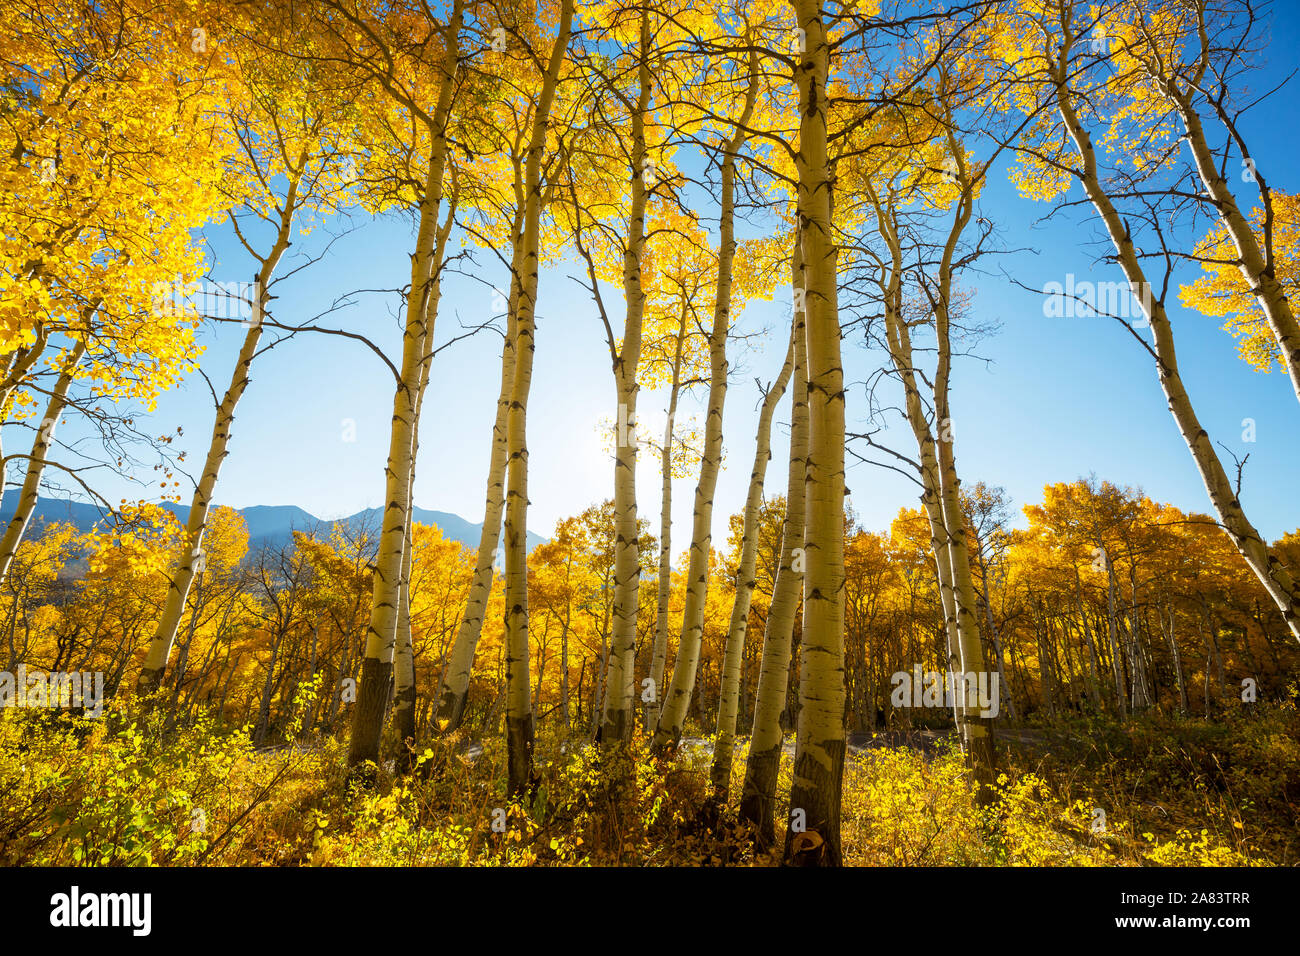 Colorful sunny forest scene in Autumn season with yellow trees in clear day. Stock Photo